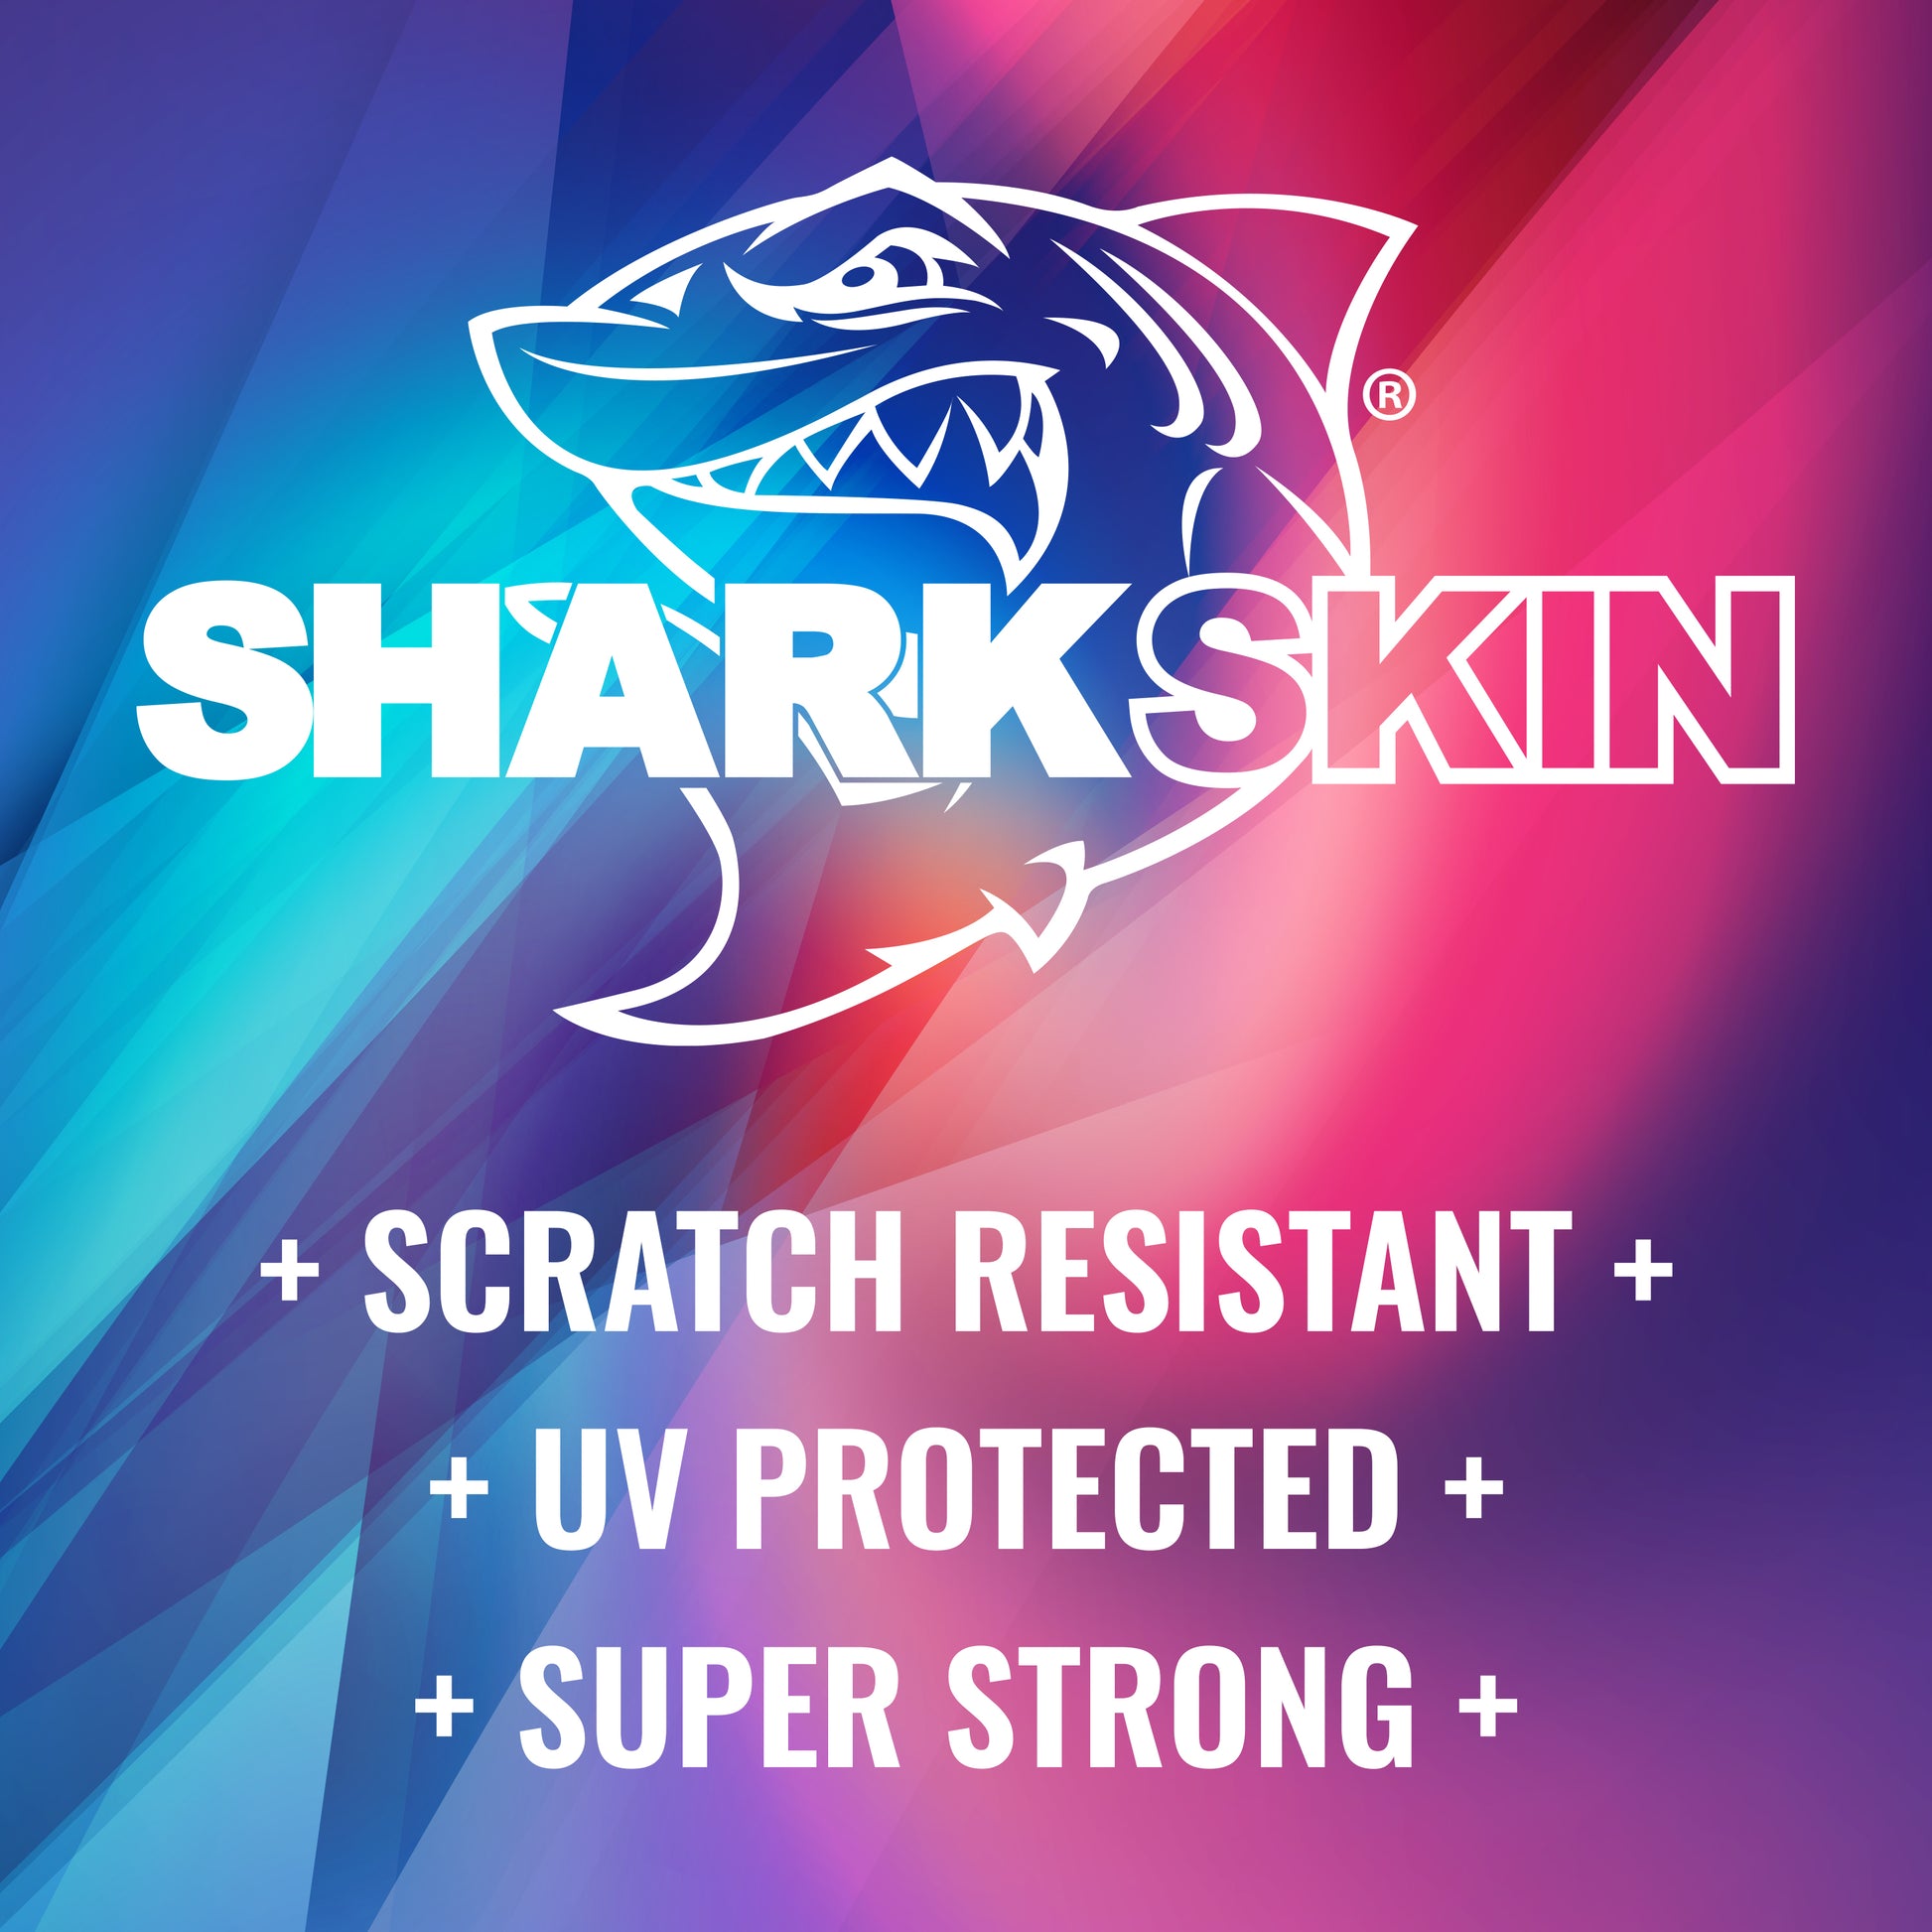 SharkSkin® logo: Scratch resistant, UV protected, and super strong, providing ultimate durability and protection.